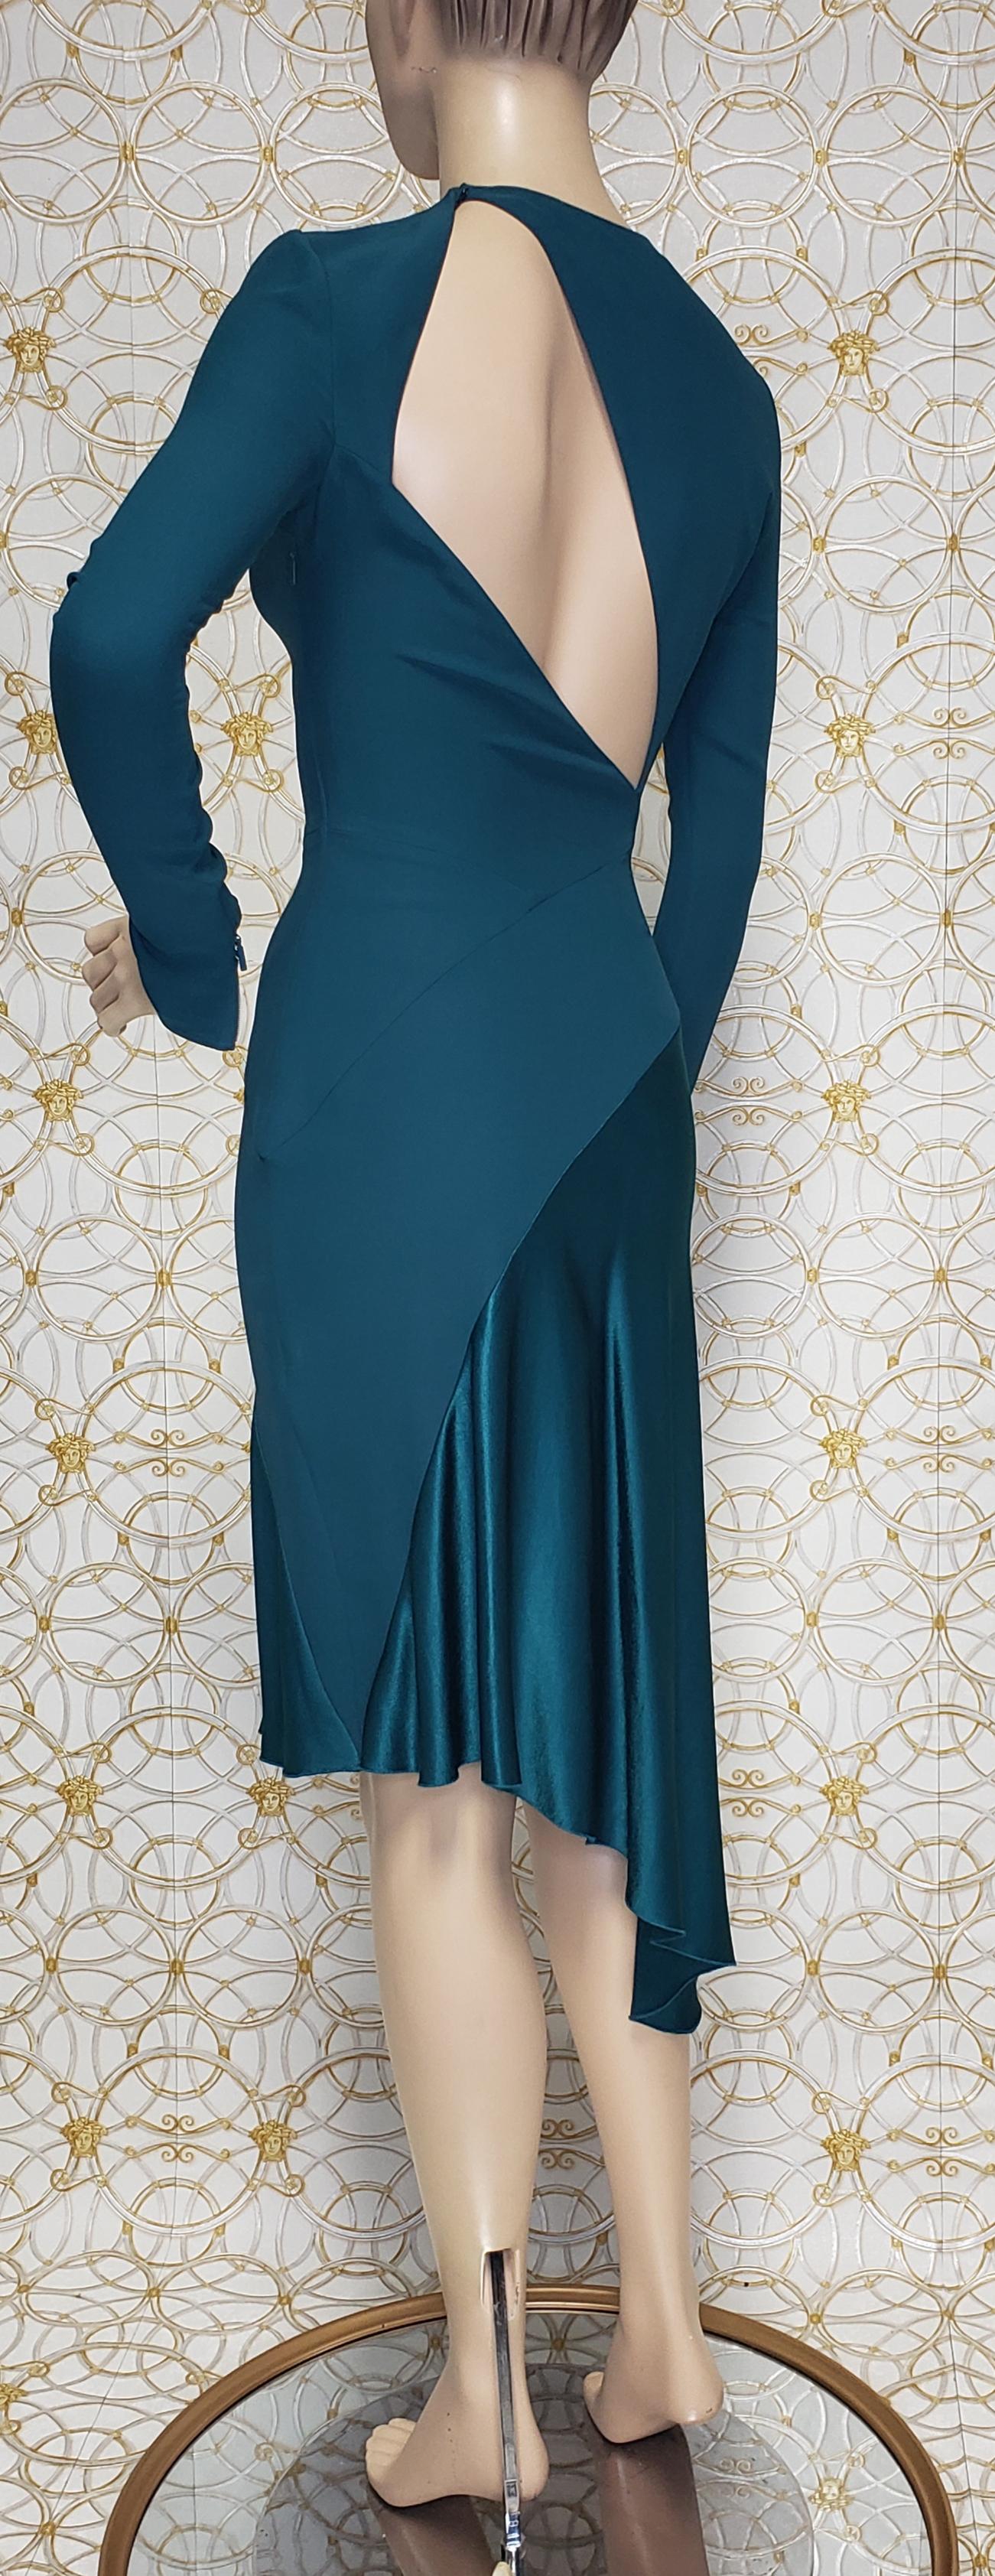 F/W 2014 look # 2 NEW VERSACE GREEN DRESS 38 - 2 For Sale 1